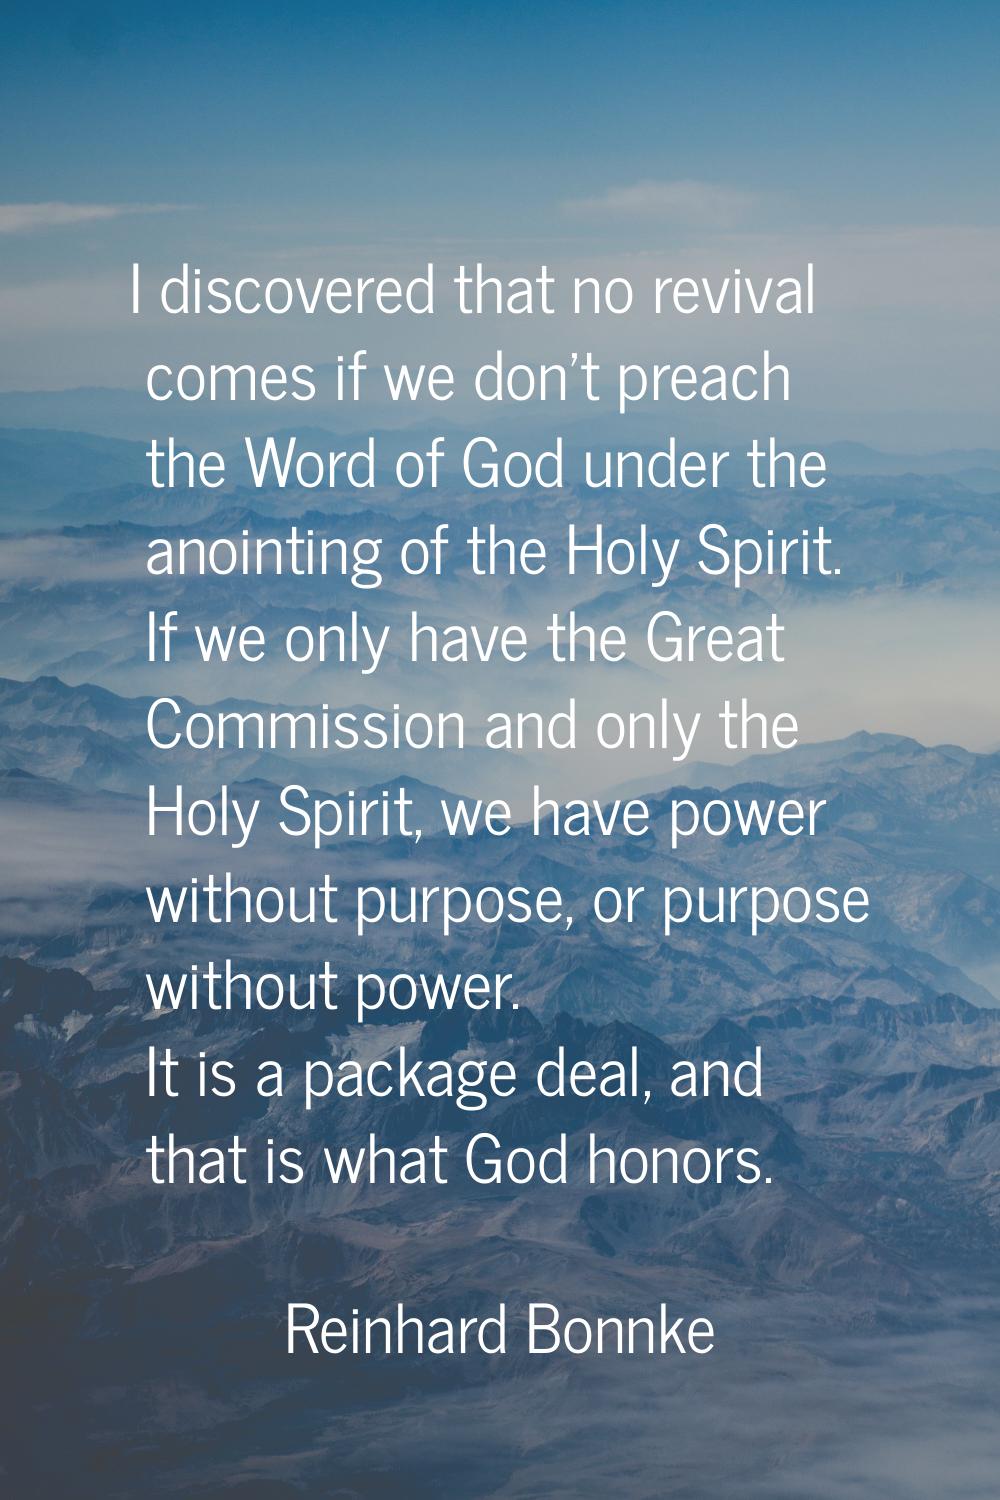 I discovered that no revival comes if we don't preach the Word of God under the anointing of the Ho